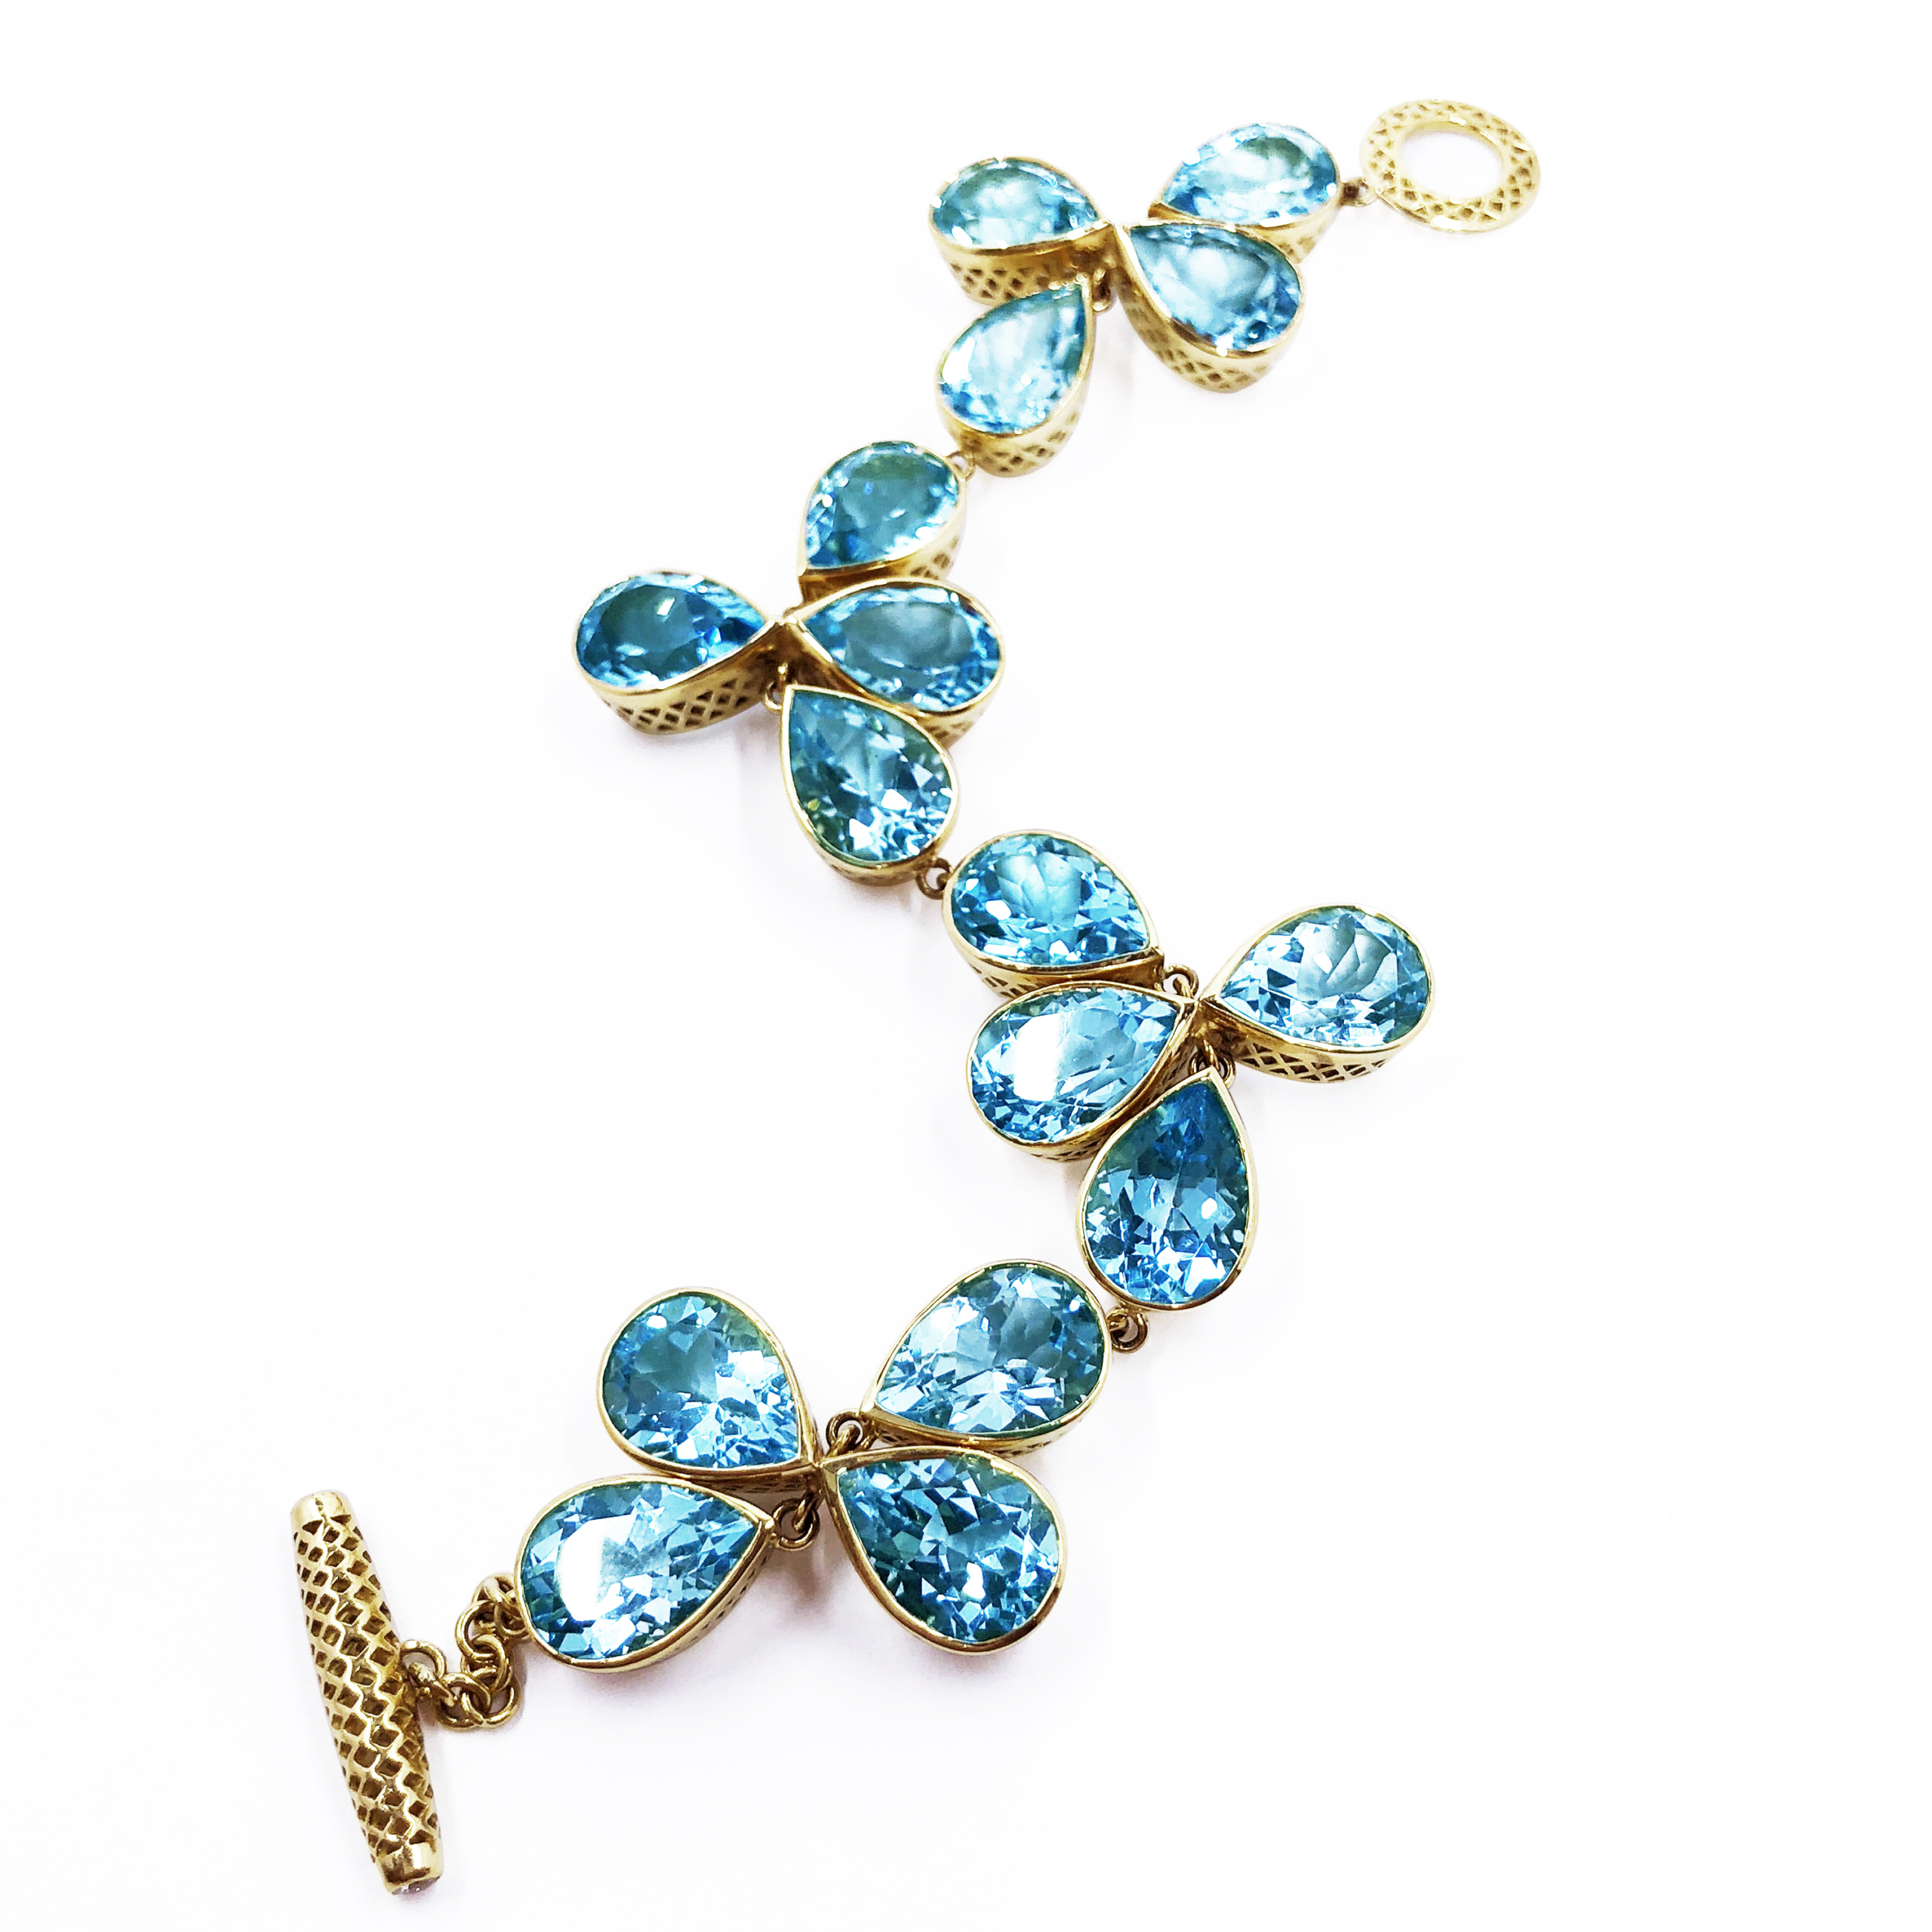 This is a photo of a gold crownwork bracelet with pear shaped blue topaz stones